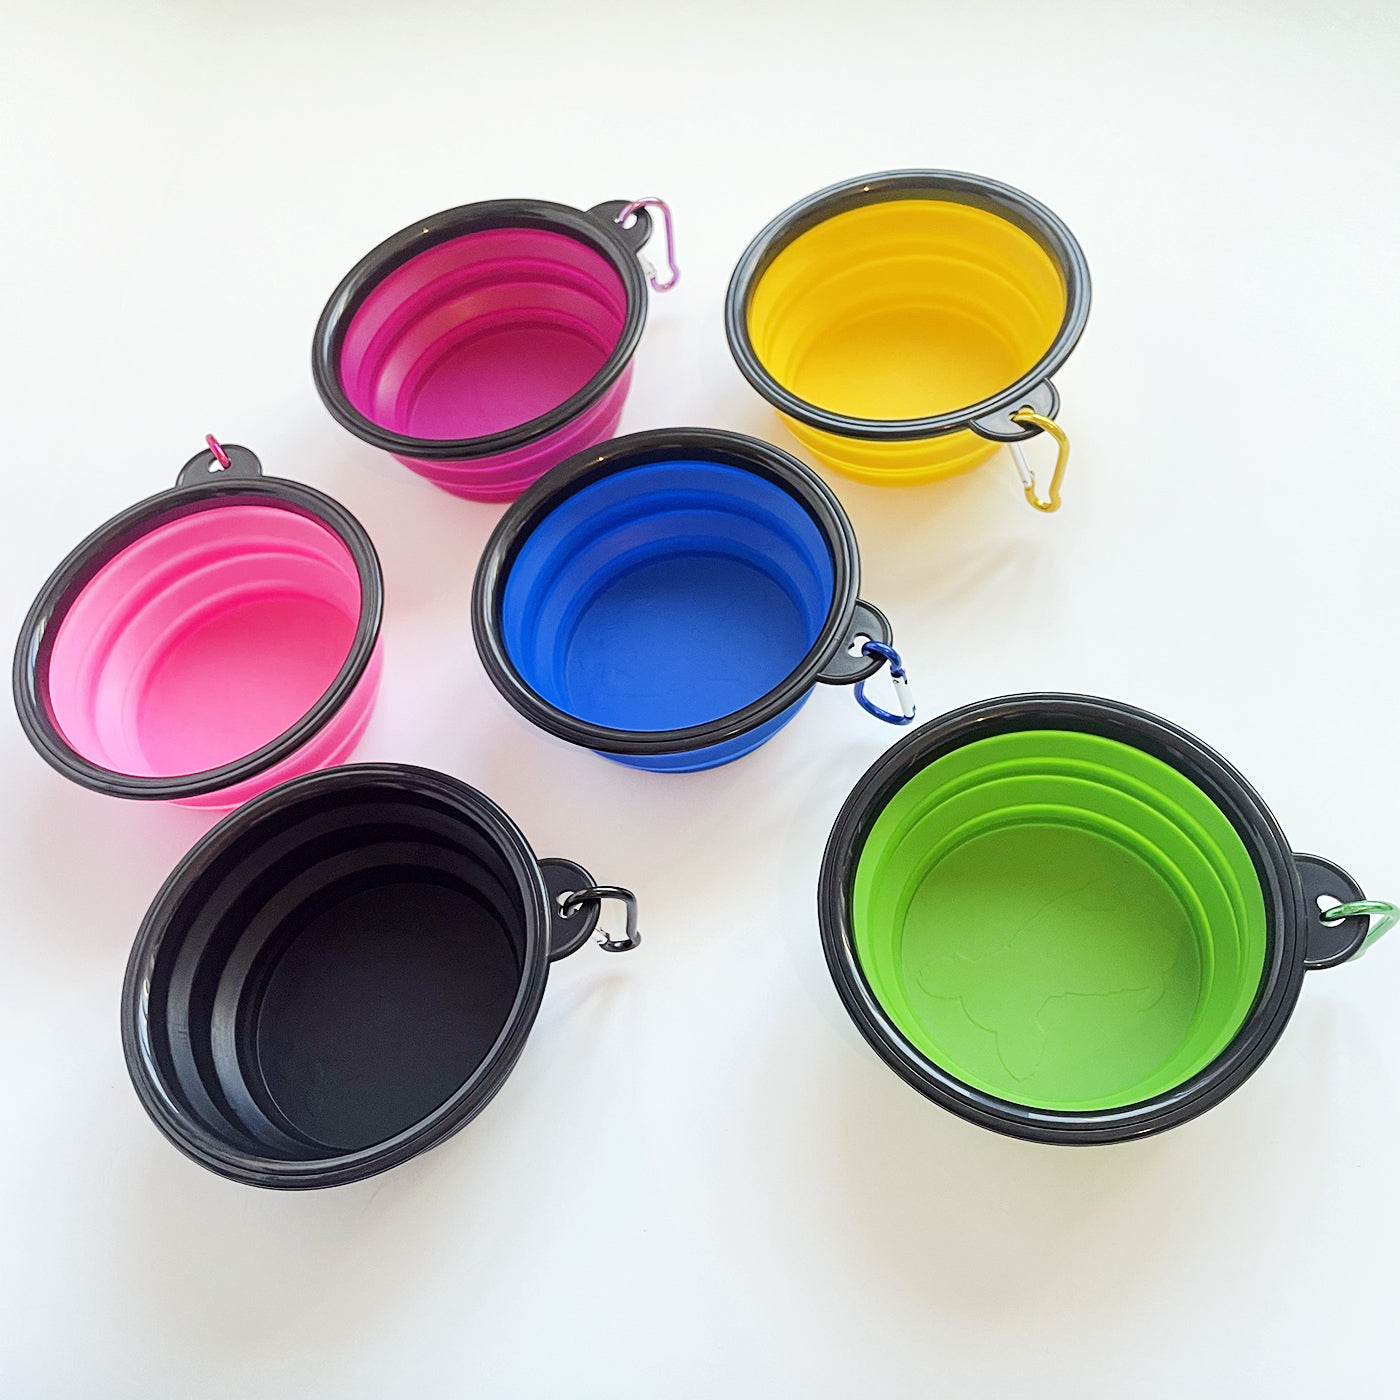 Collapsible Silicone Travel Pet Food Bowl